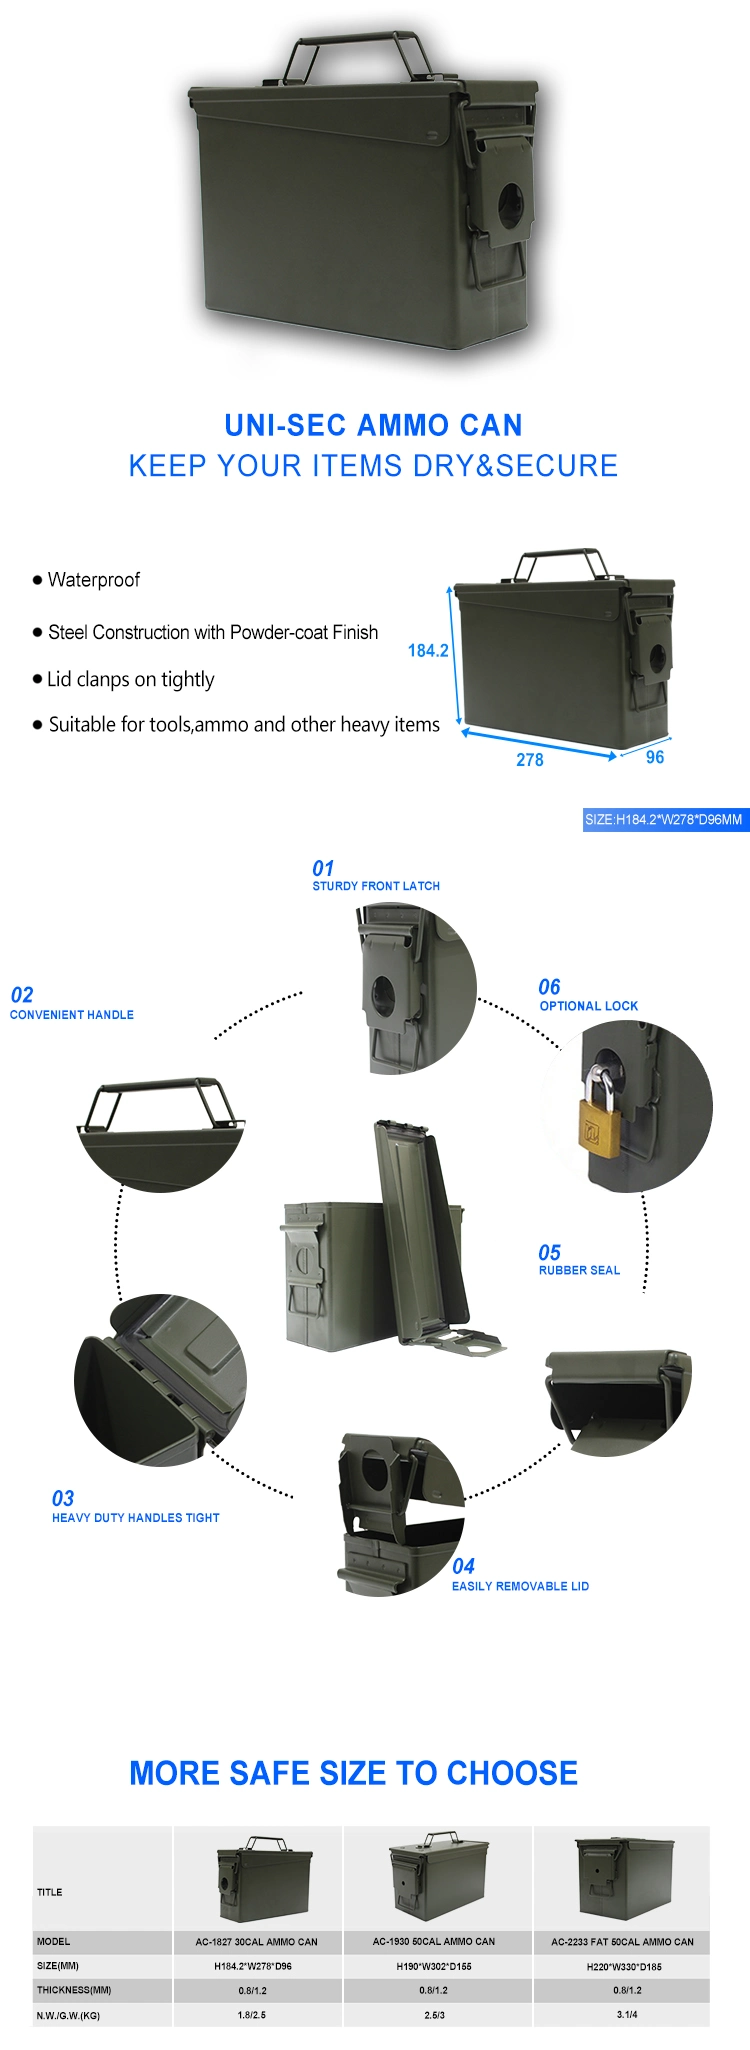 Hot Sale Wholesale Price Hot Sale & High Quality Best Selling Security Electronic Digital Home Ammo Can Safe Professional Factory Offer (AC-2233)